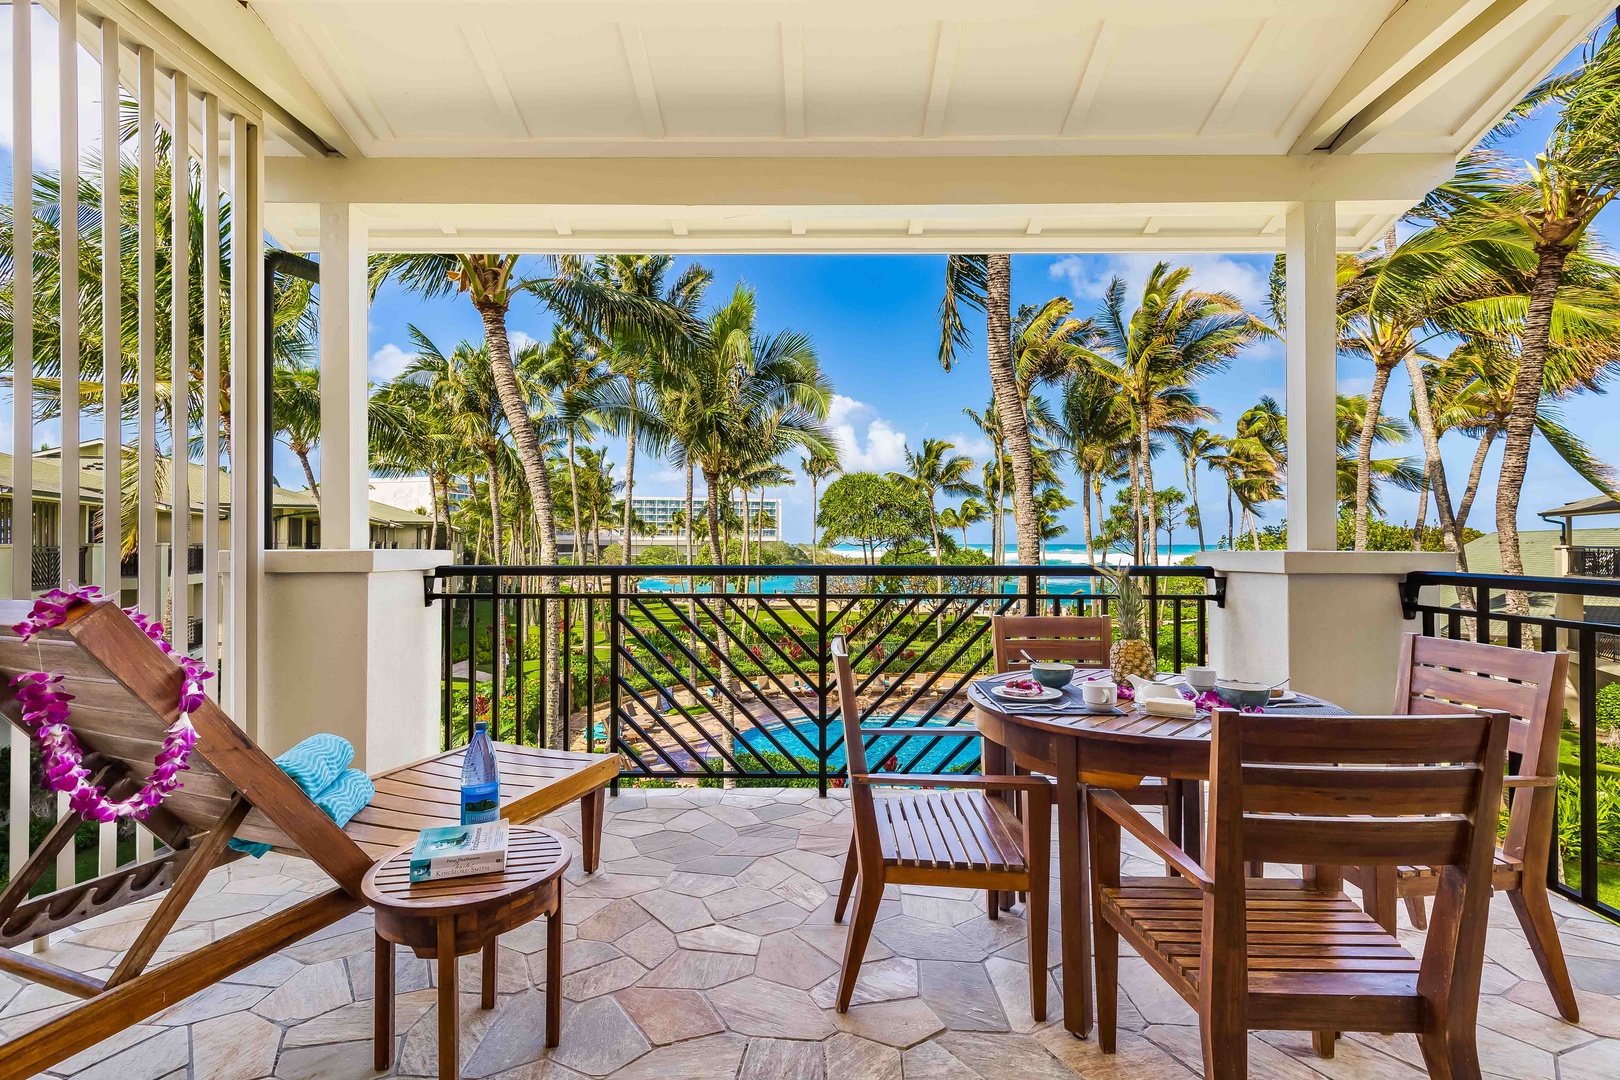 Kahuku Vacation Rentals, Turtle Bay Villas 311 - This 3rd floor condo welcomes you and an additional 7 guests to experience all of the magic that Oahu has to offer with its premiere location on the world-famous North Shore and within the expansive 850-acre community of Turtle Bay.